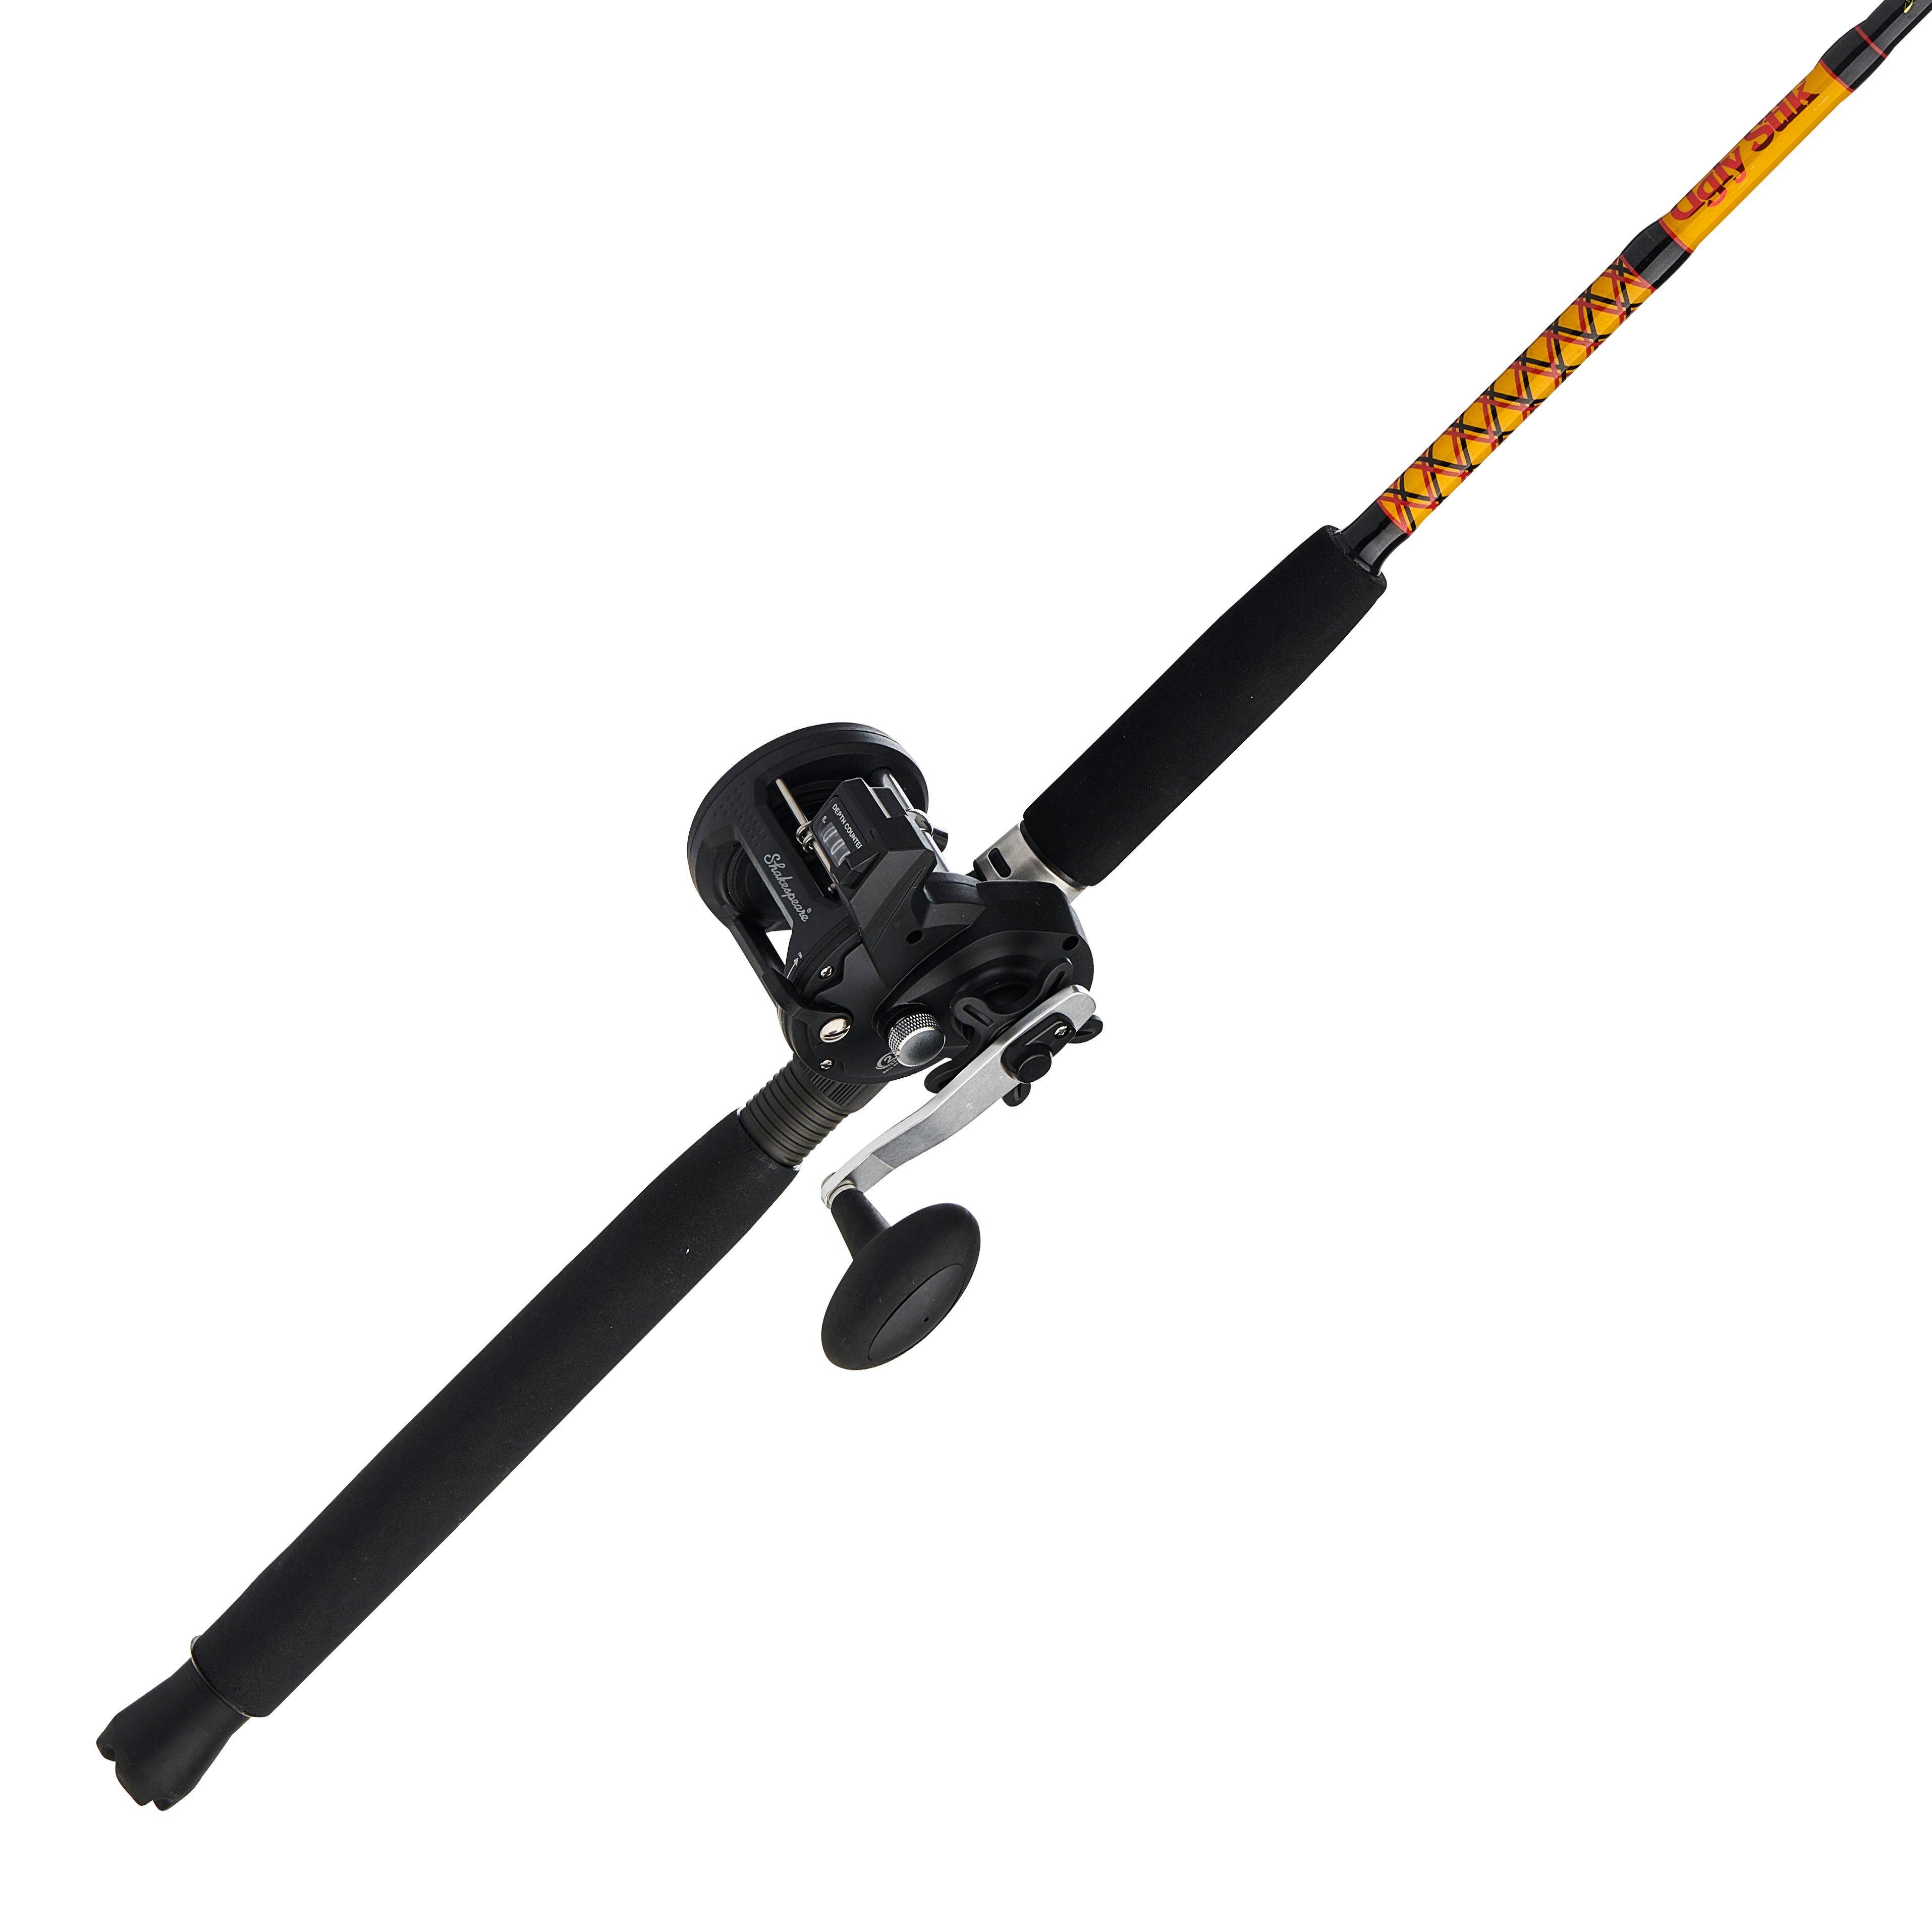 https://cs1.0ps.us/original/opplanet-ugly-stik-bigwater-coventional-combo-6-3-1-right-30-9ft-rod-length-light-power-2-pieces-rod-black-red-yellow-bwcdr620c902-30lc-main